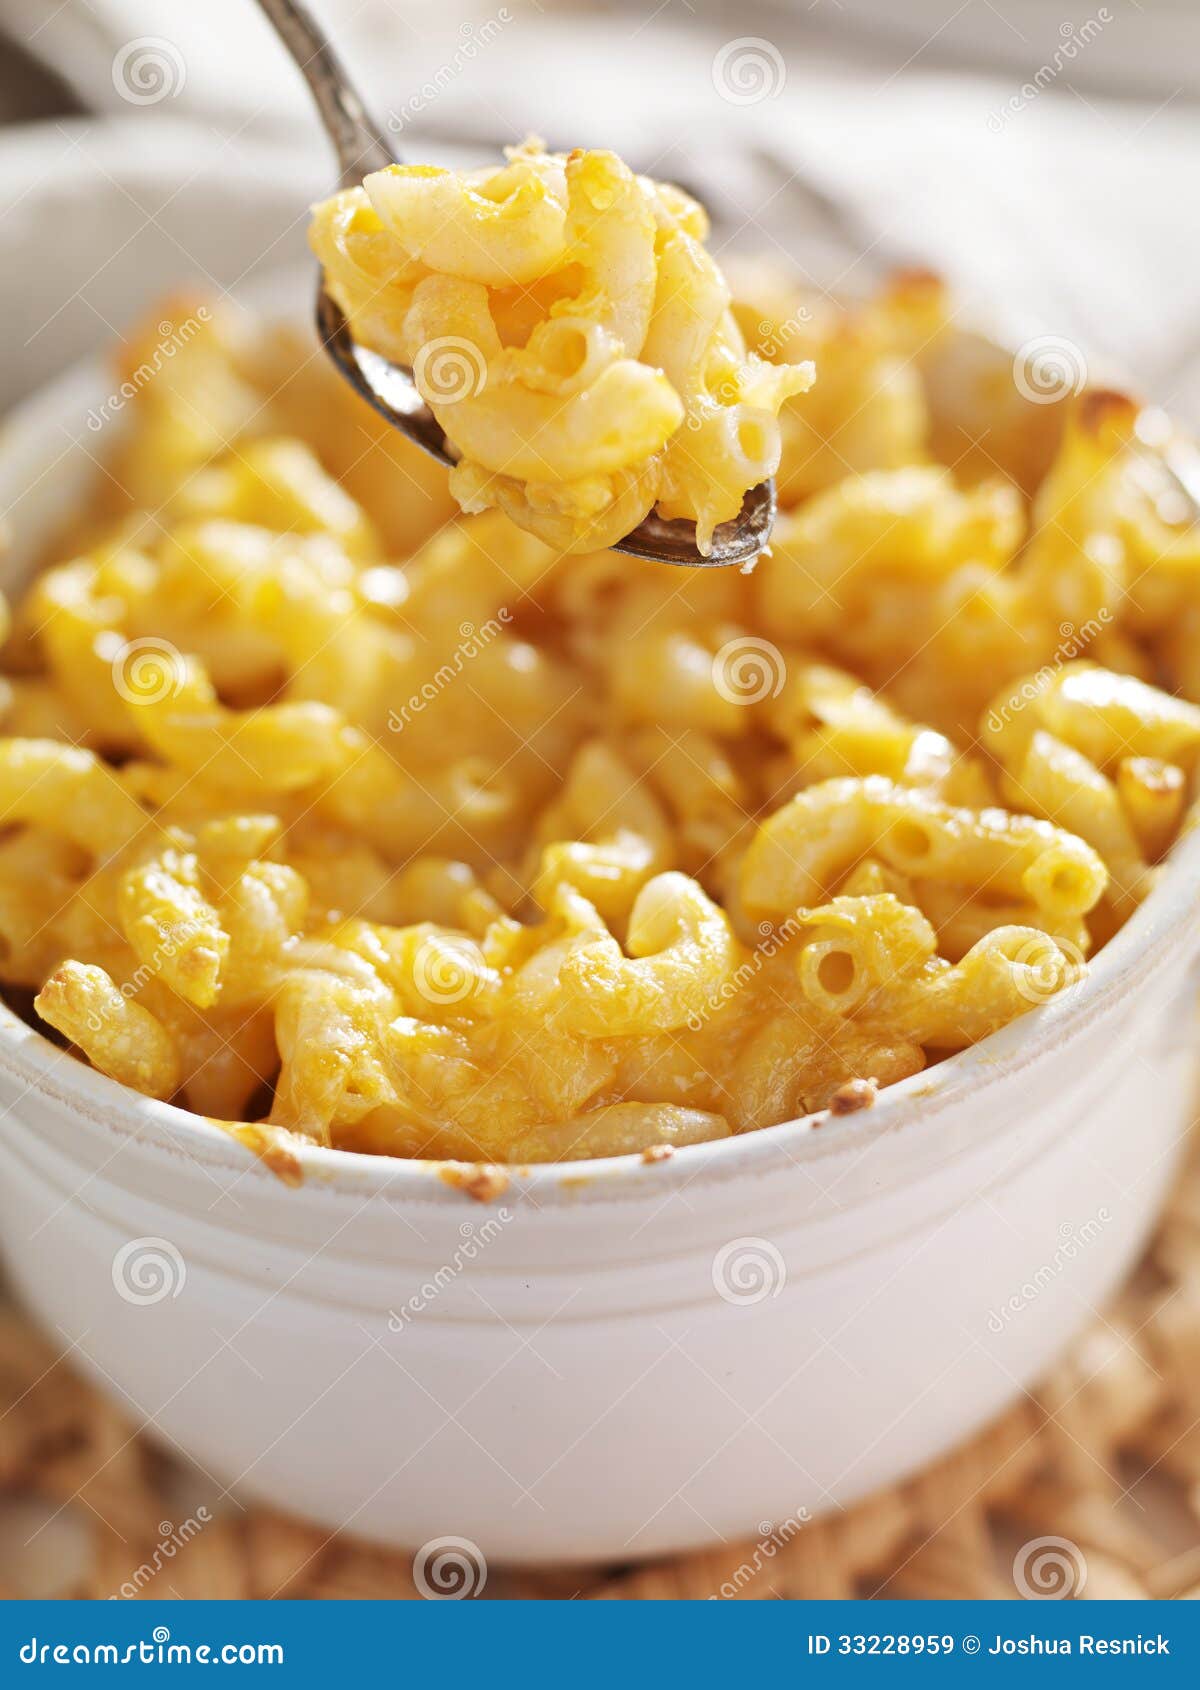 Spoon Picking Up Macaroni And Cheese Stock Image - Image ...